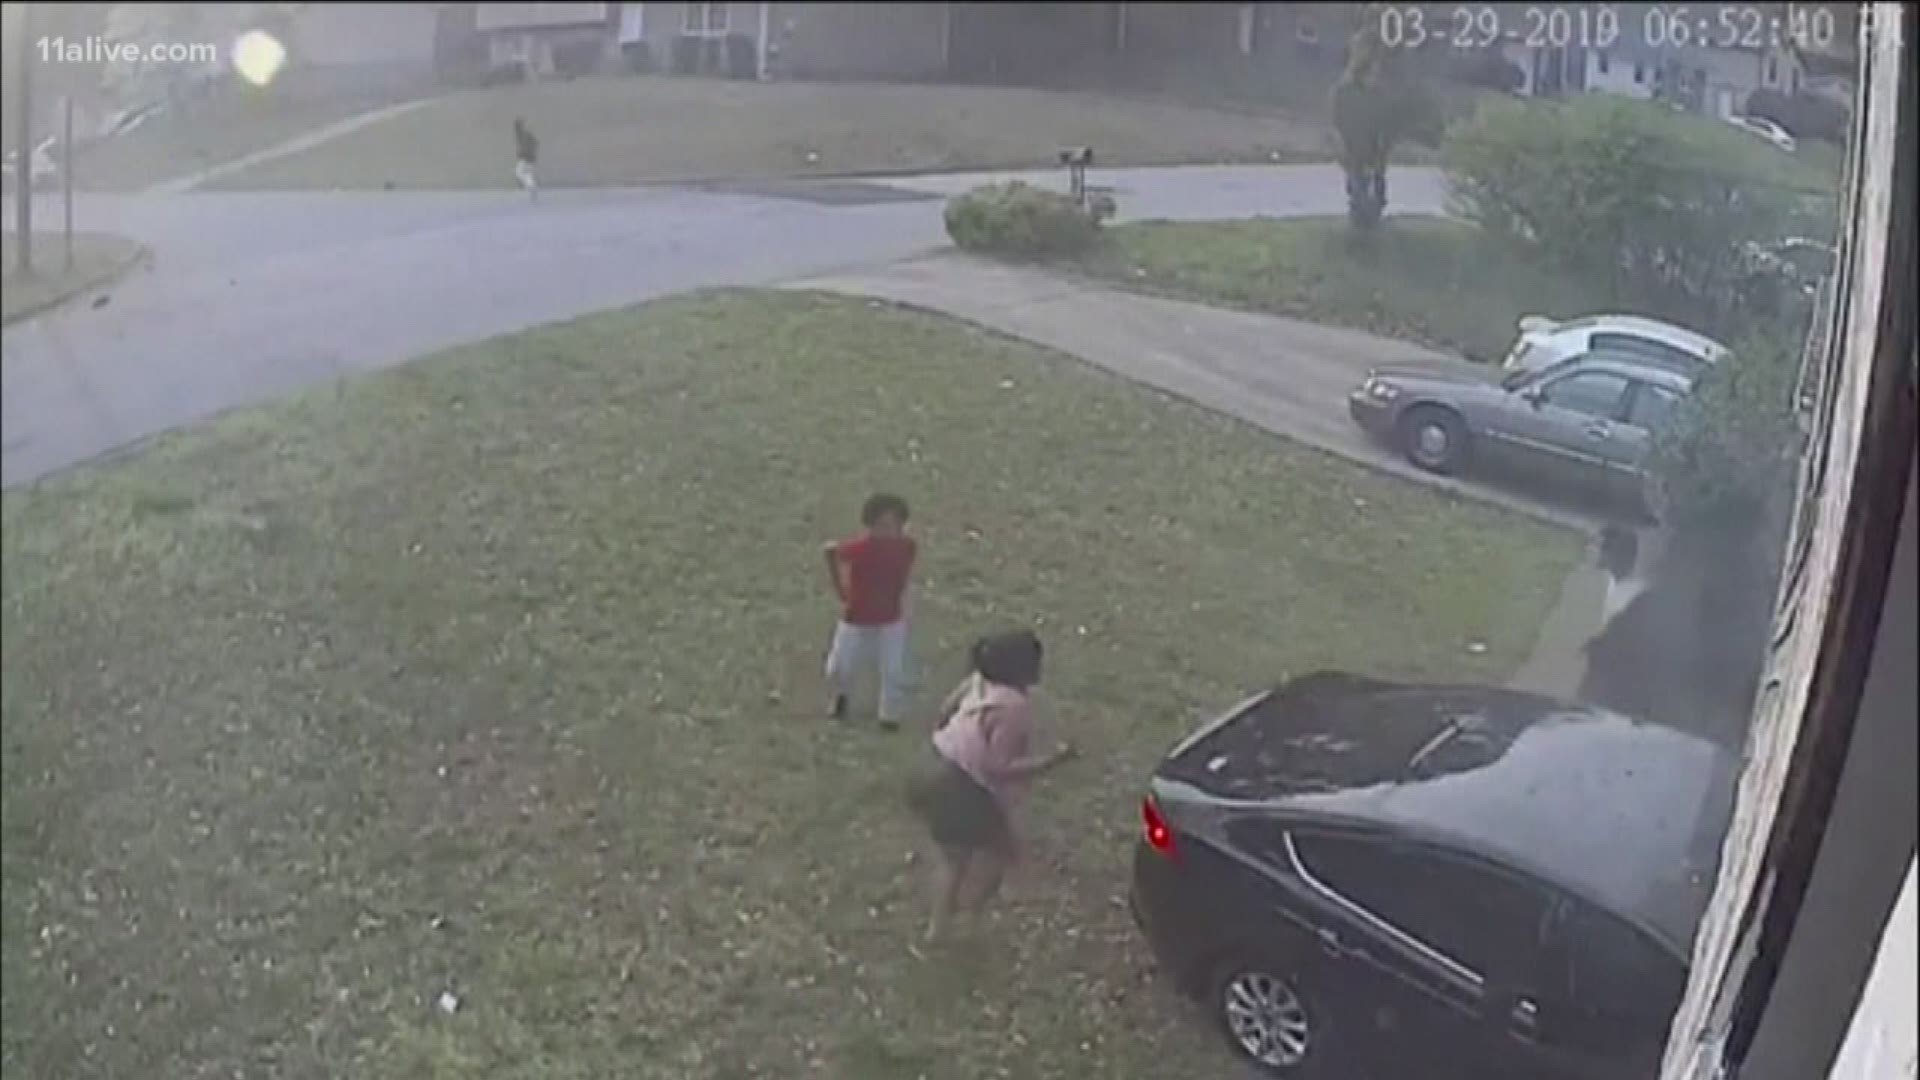 The frightening crash, captured on video, showed a car plowing into a front yard in Lithonia, hitting two little girls.